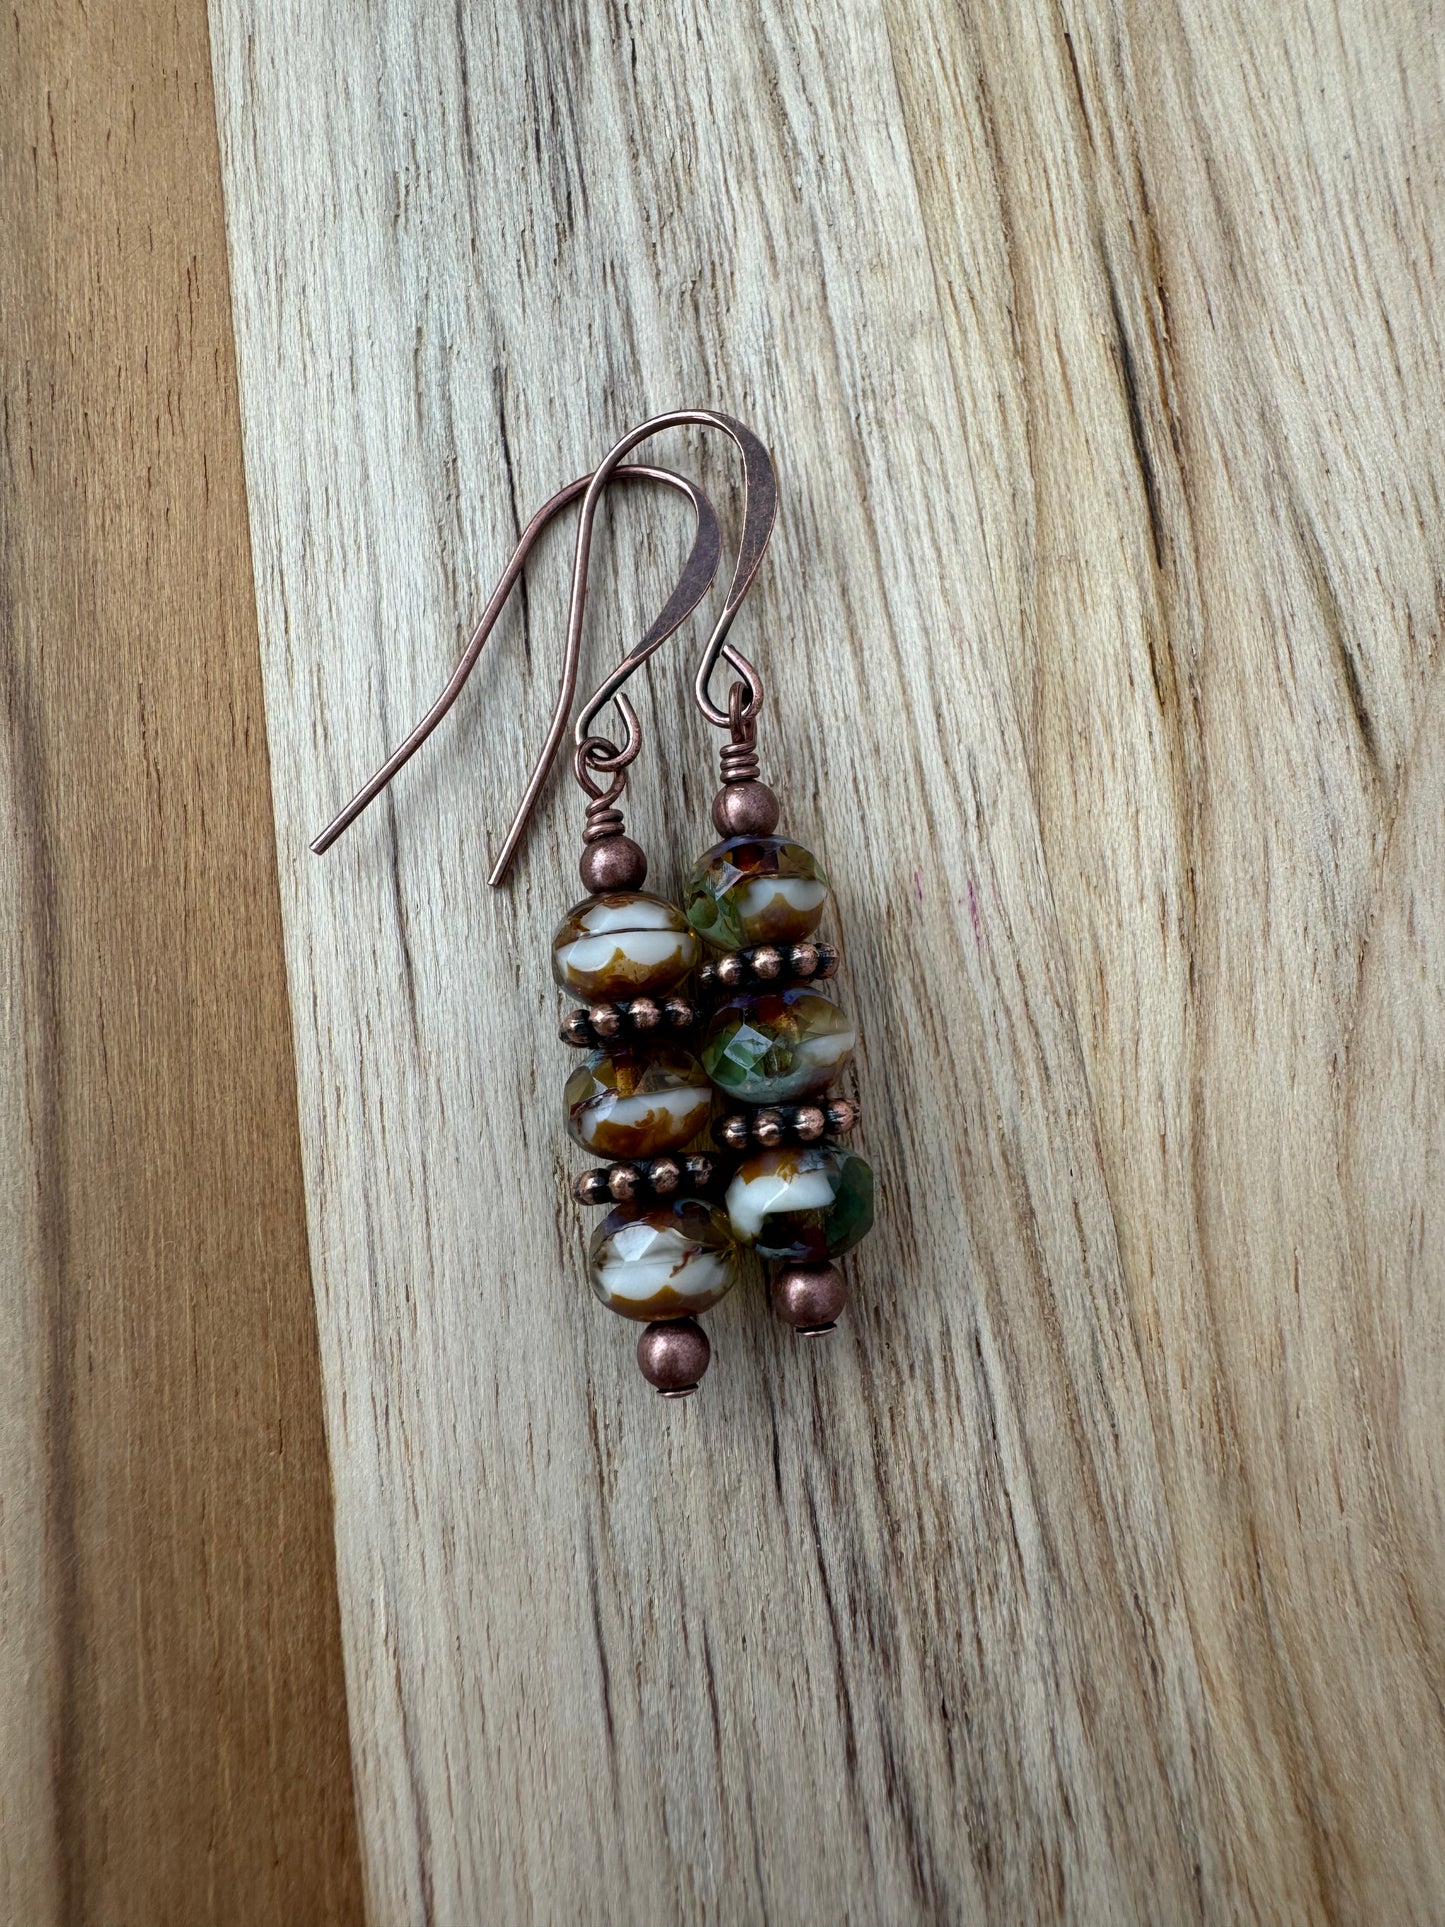 Stacked Czech Glass Vintage Boho Dangle Earrings with Antique Bronze and Copper Accent Beads